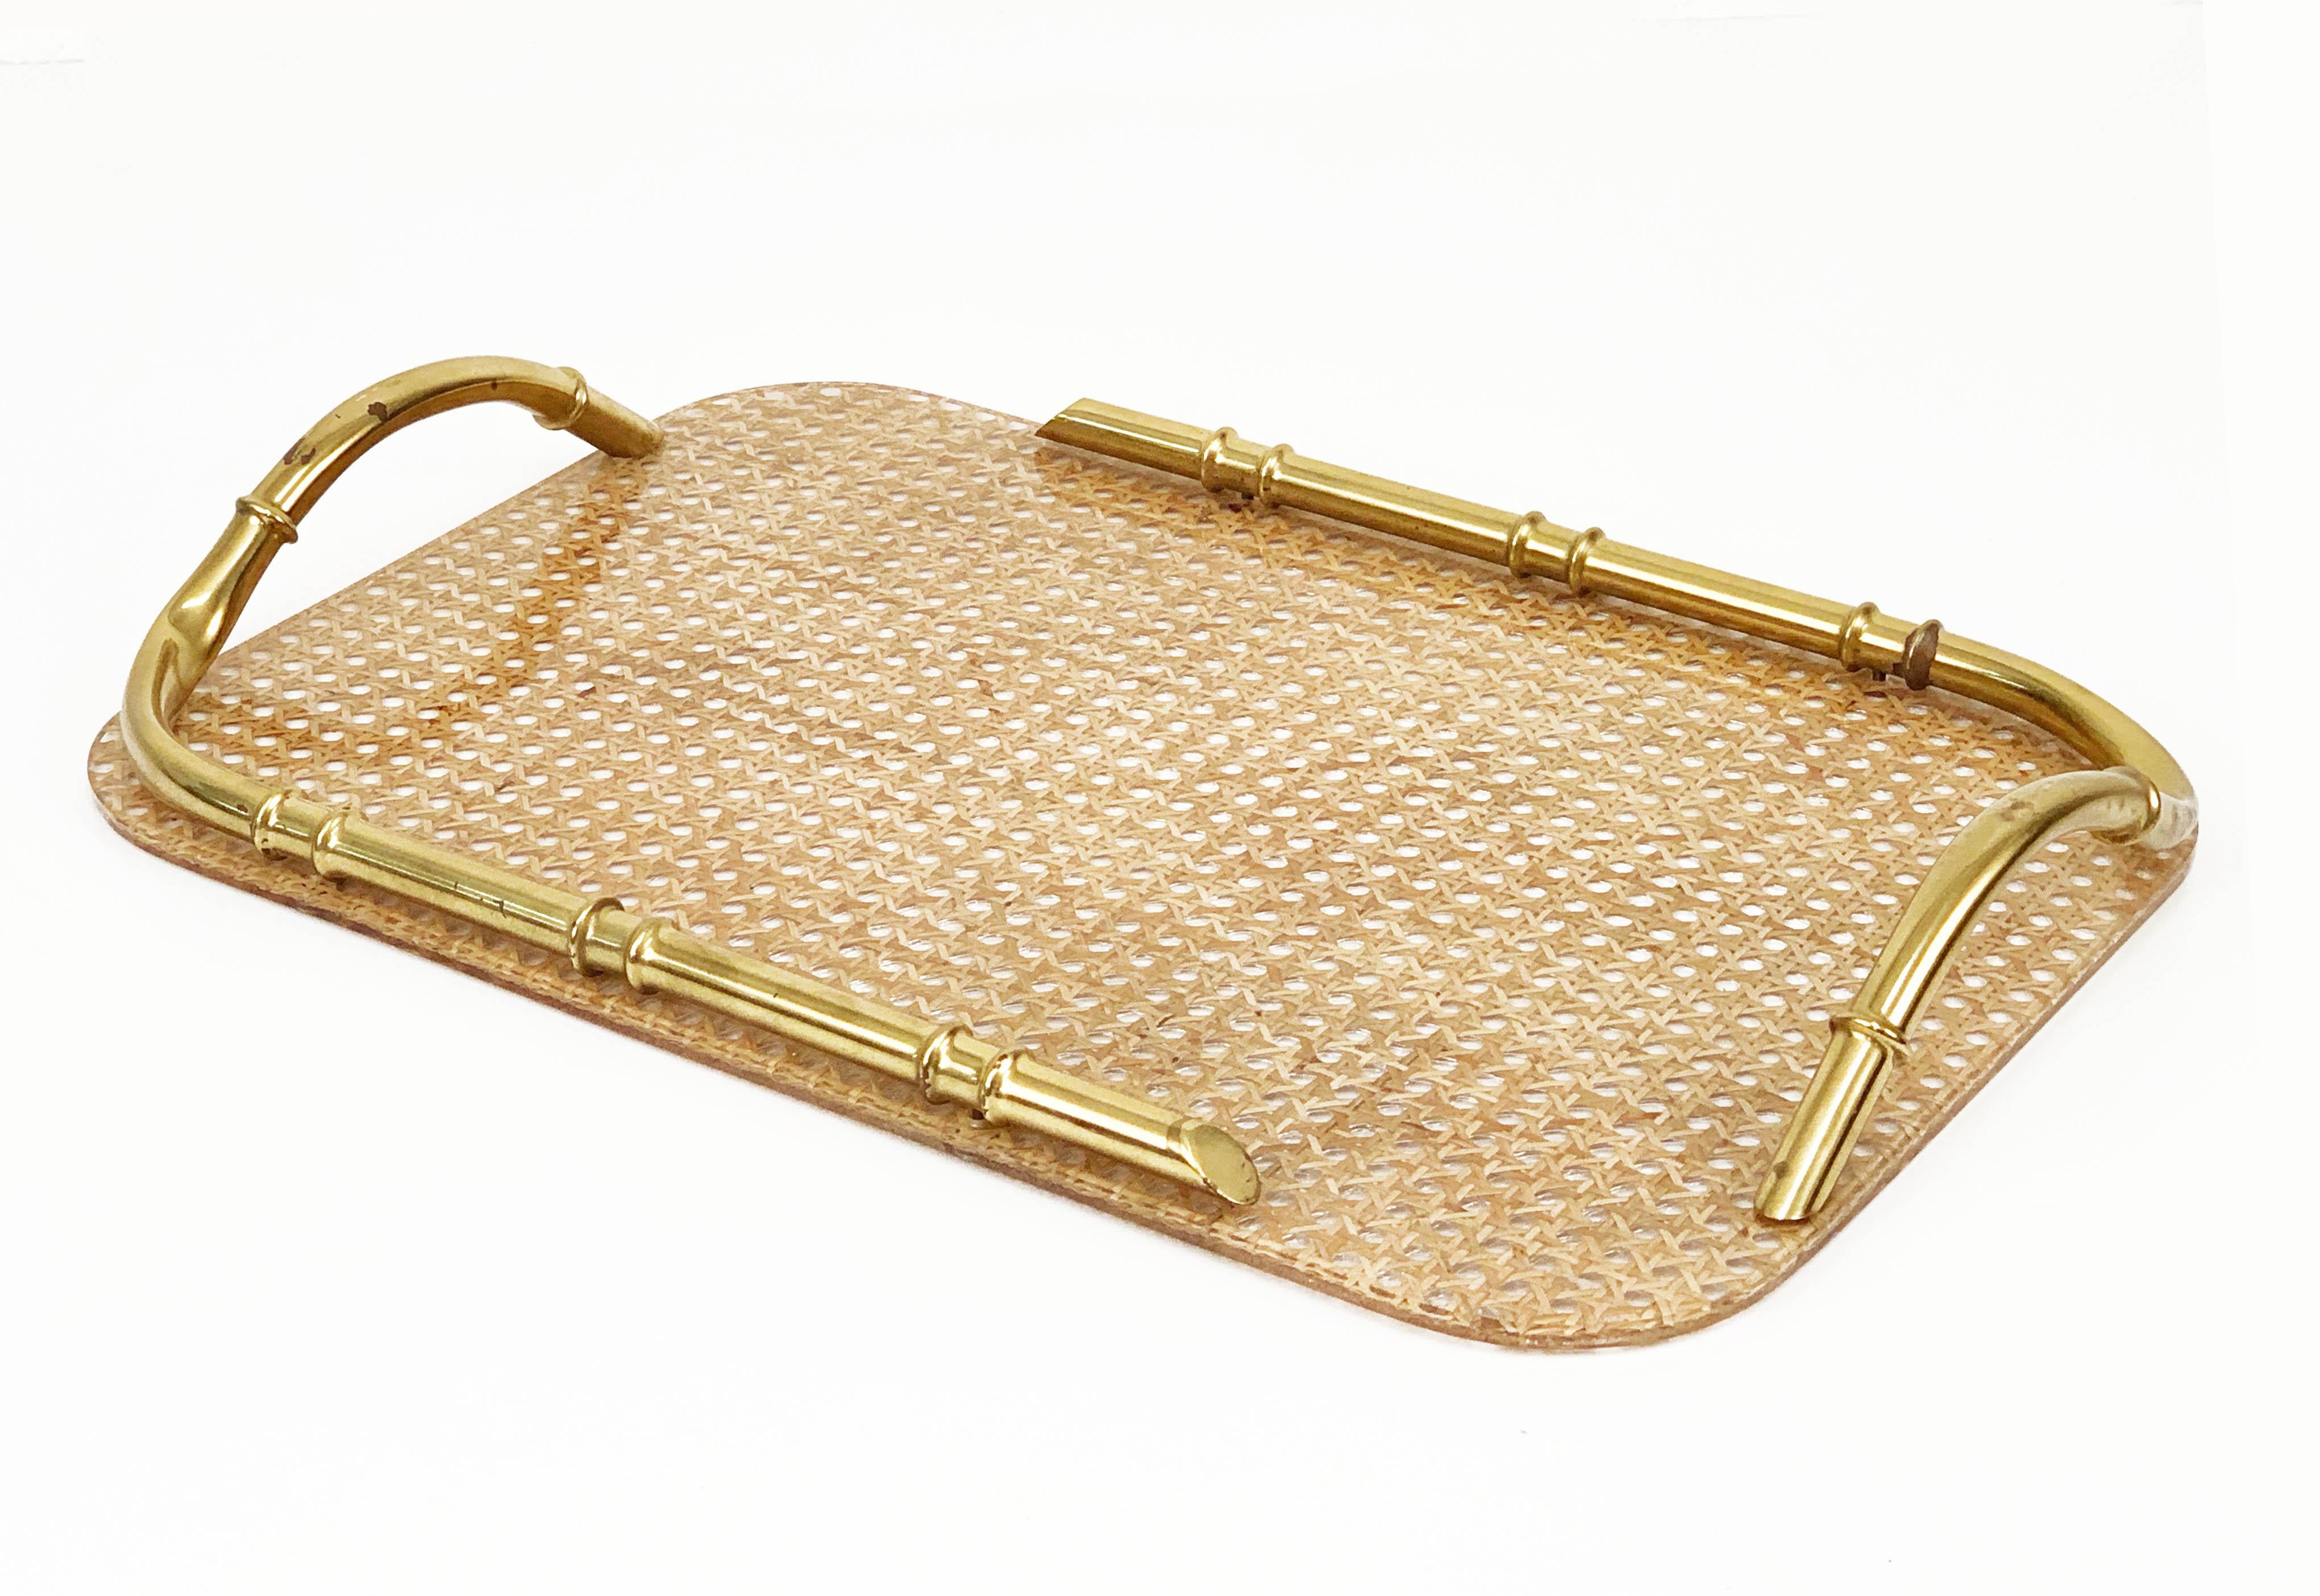 20th Century Midcentury Brass Lucite and Faux Bamboo Serving Tray Christian Dior Style, 1970s